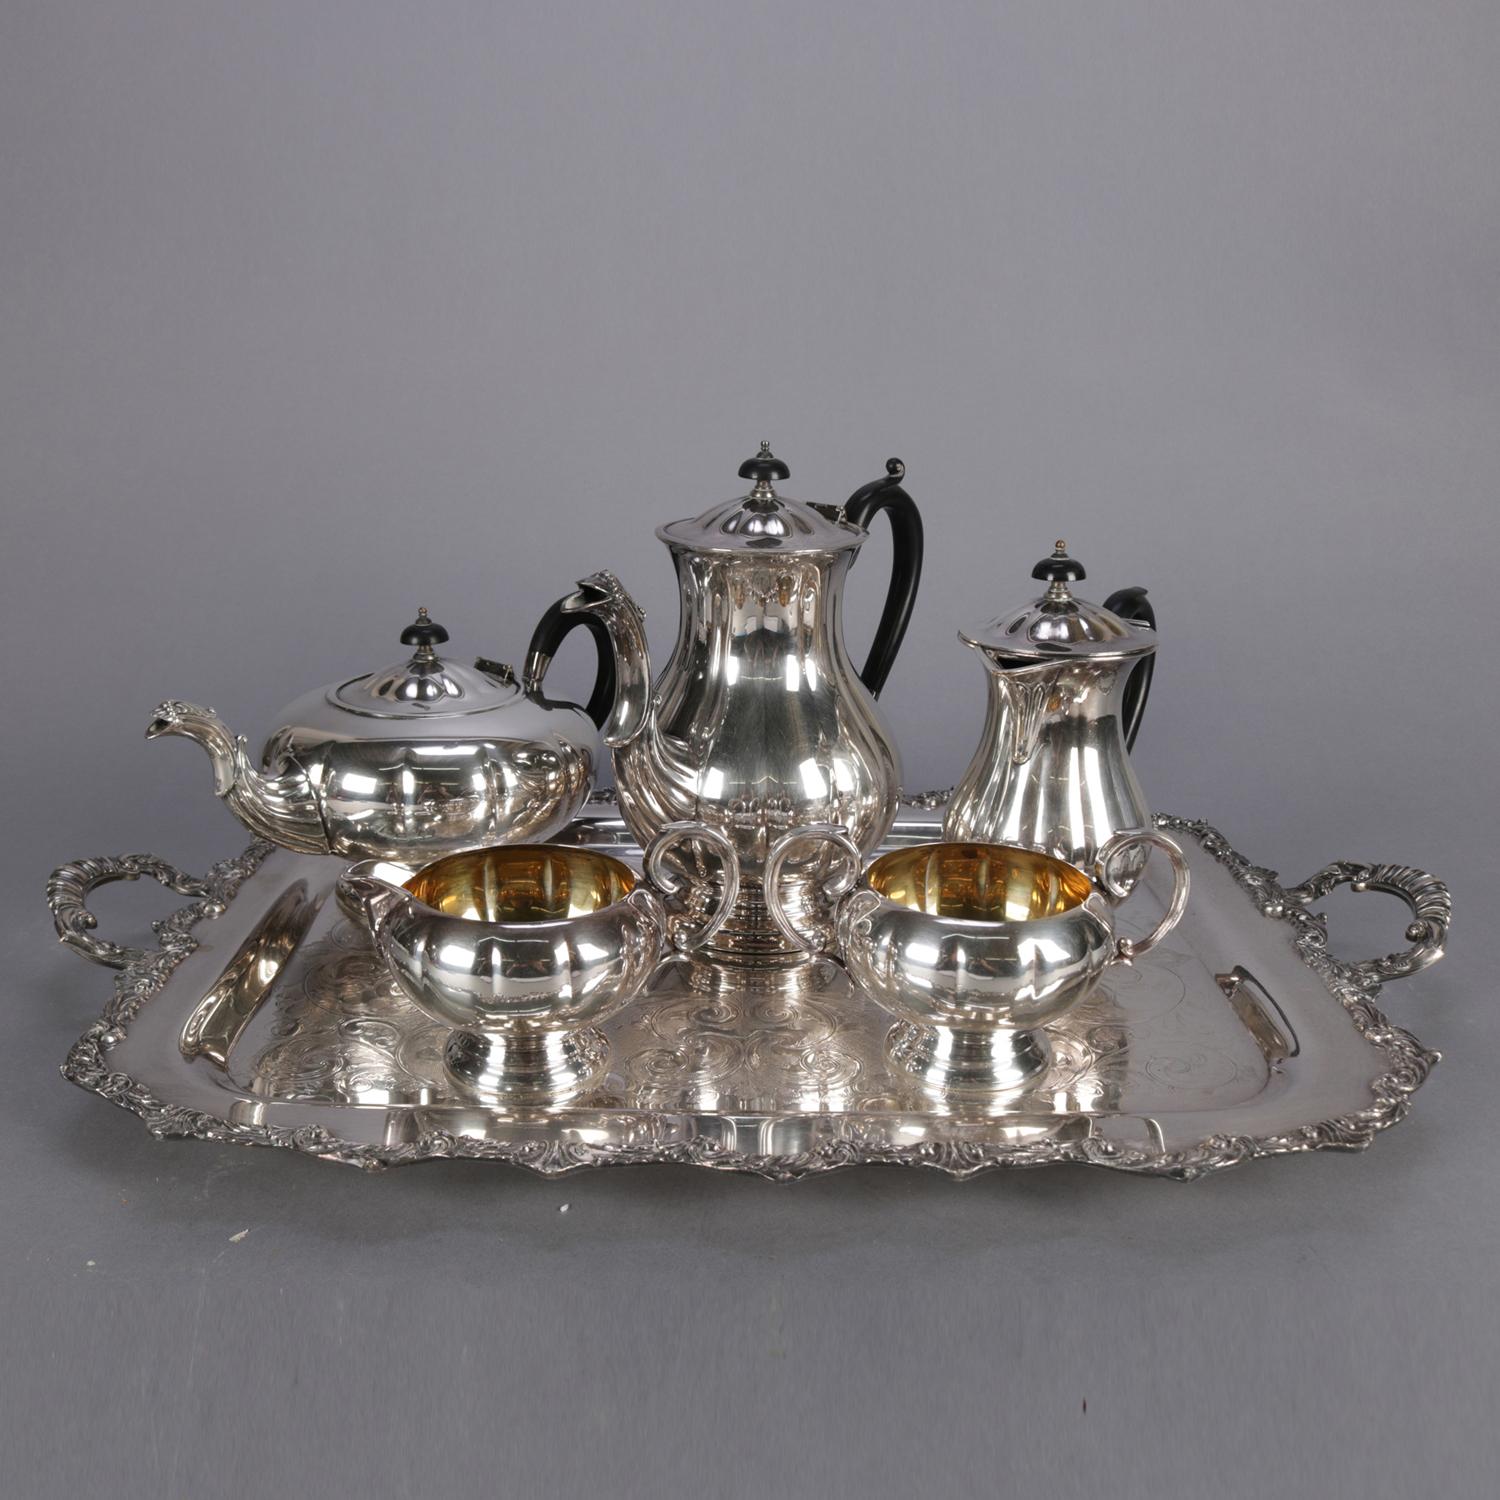 Marlboro silver plate Old English reproduction six-piece tea set features Mellon form and footed with ebonized wood insulated handles and includes coffee and tea pots, open sugar with gold wash interior, and scrolled incised double handle serving